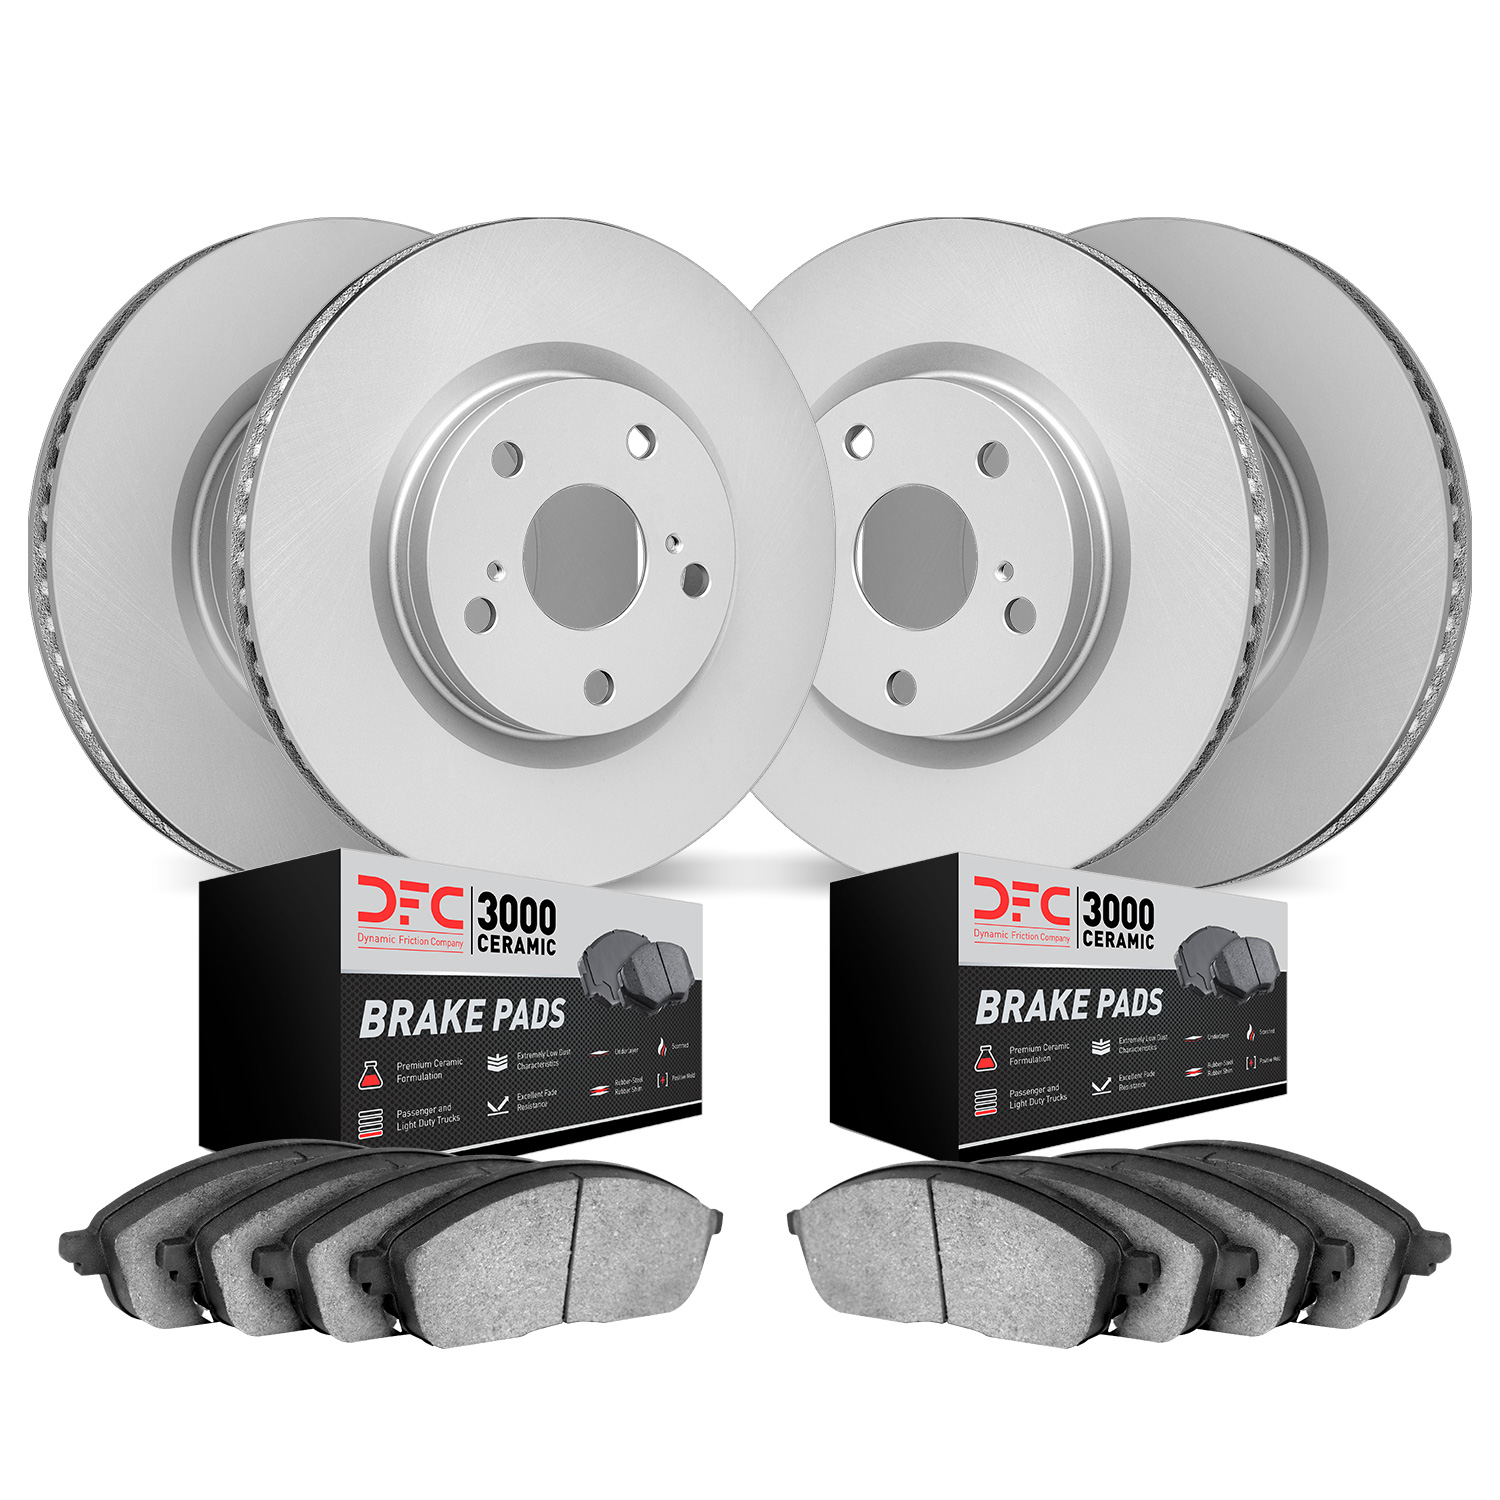 4304-73040 Geospec Brake Rotors with 3000-Series Ceramic Brake Pads Kit, 2011-2018 Audi/Volkswagen, Position: Front and Rear